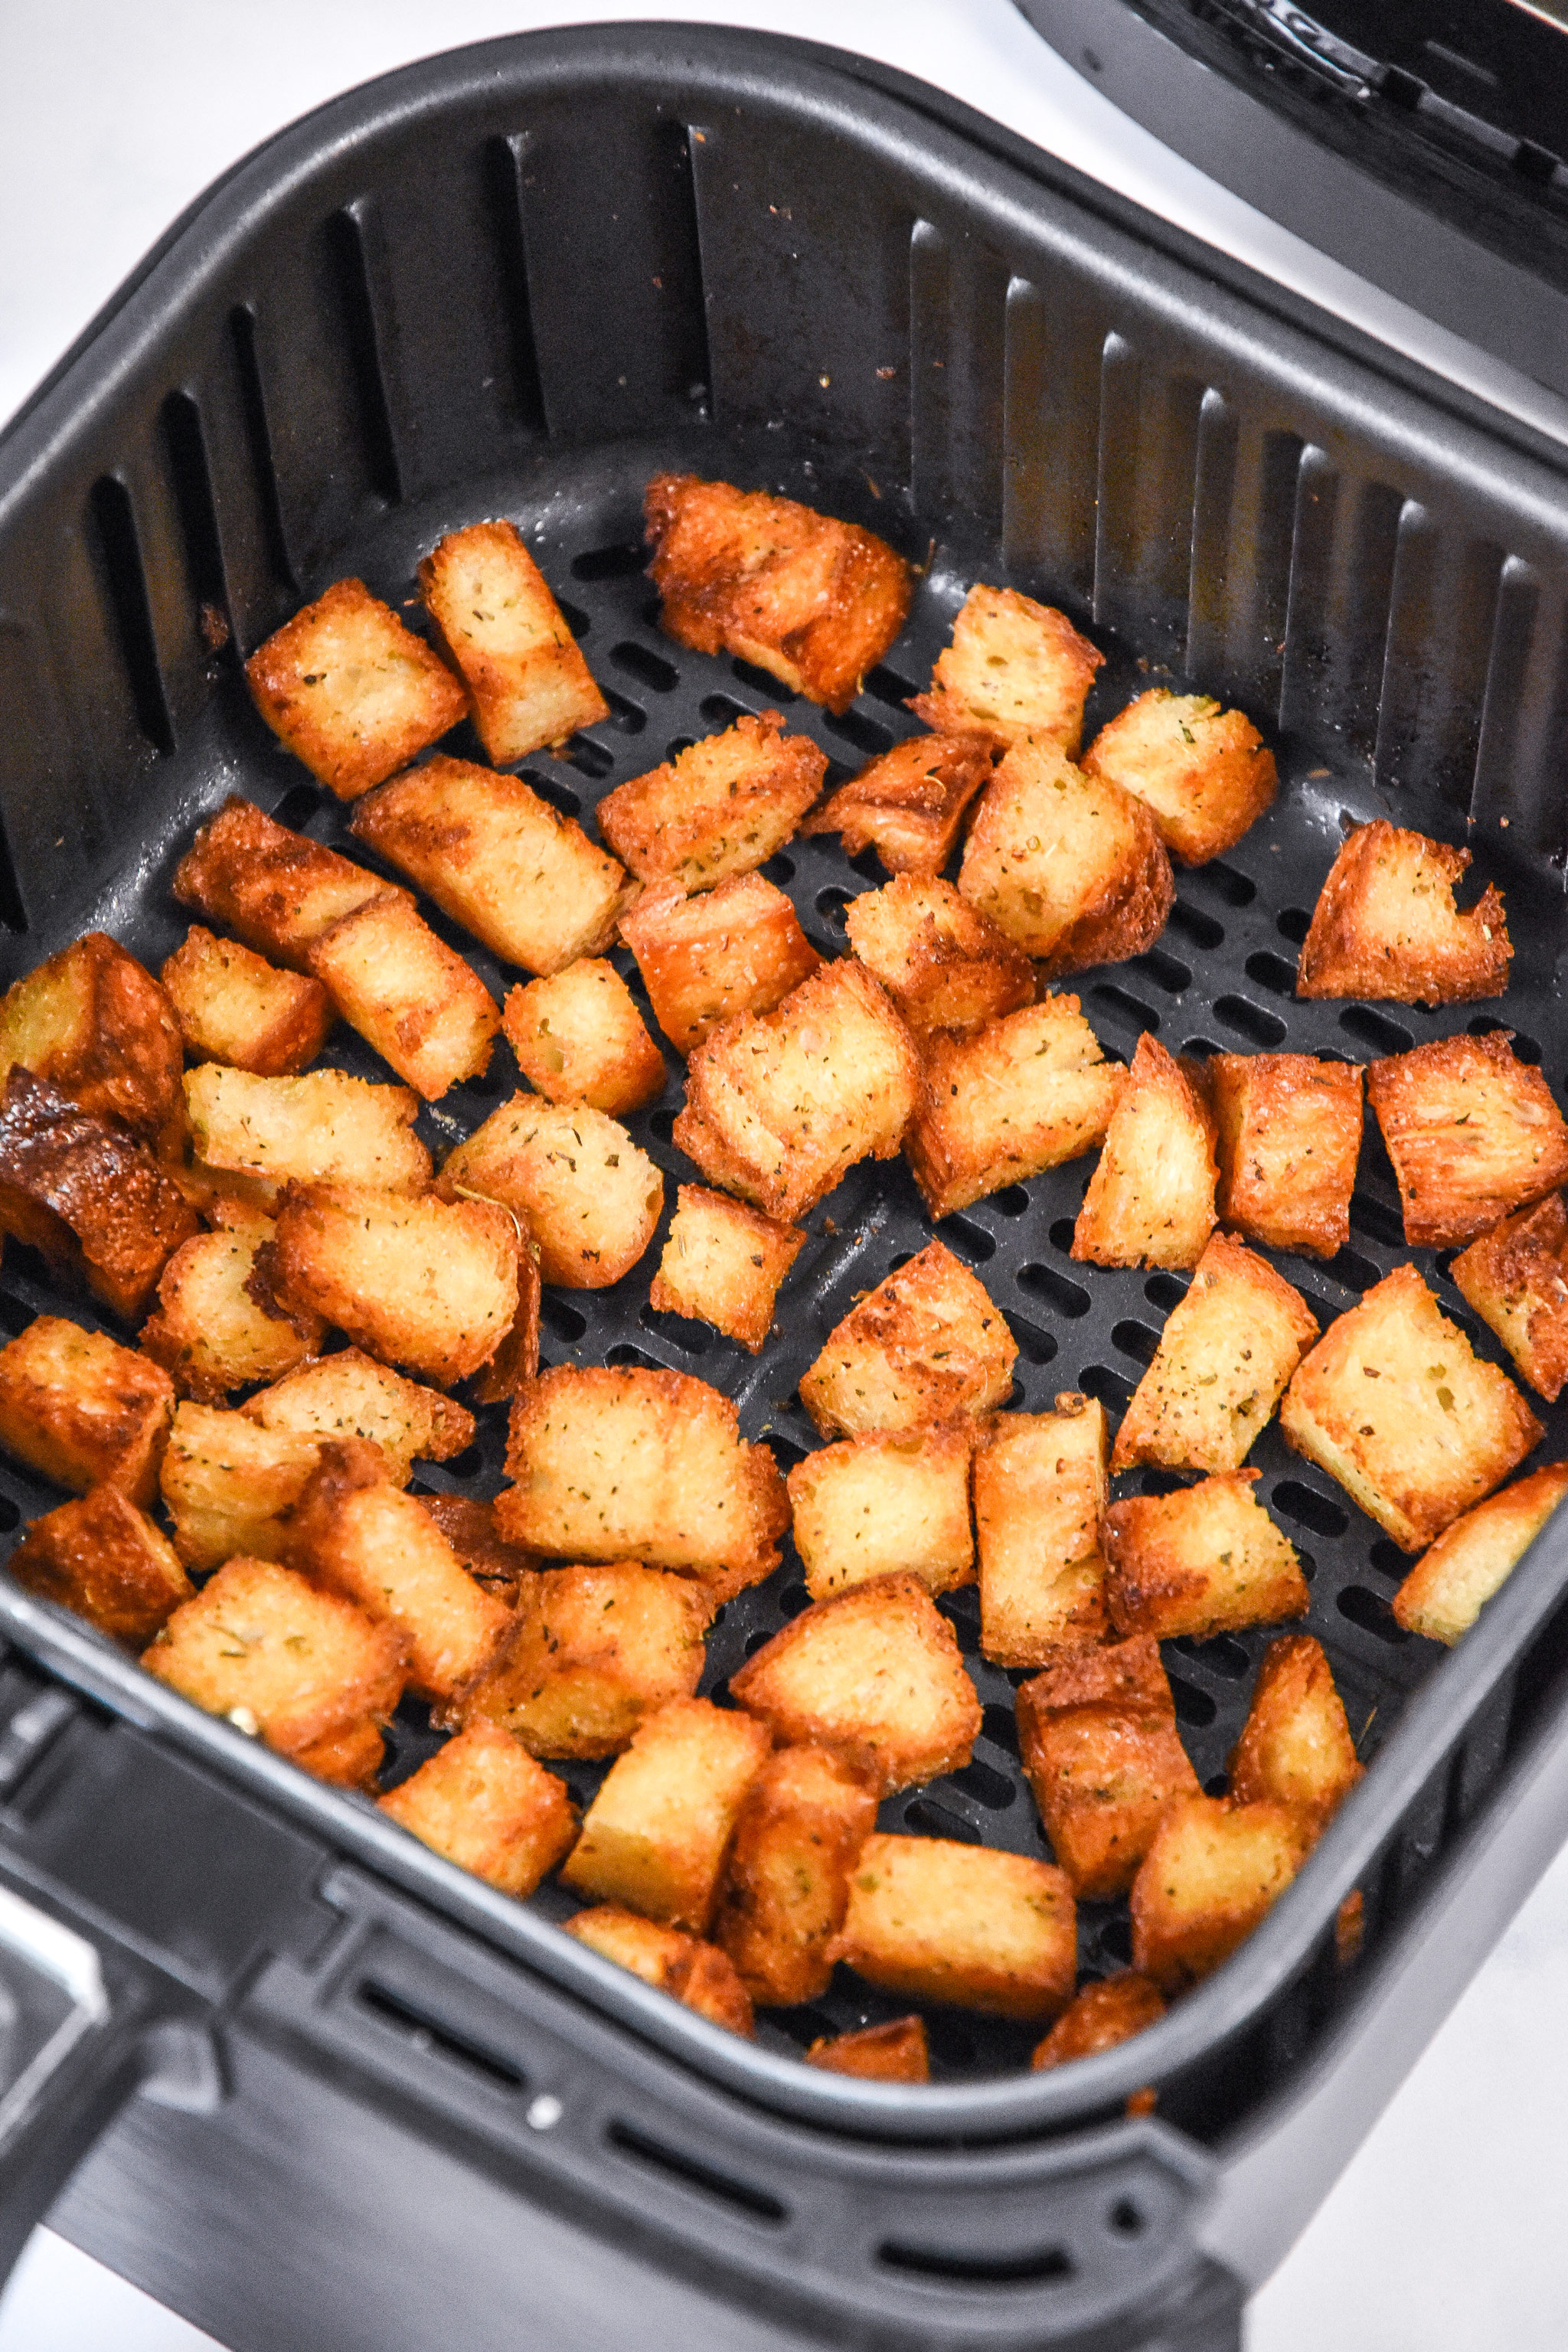 How to Make Croutons in the Air Fryer